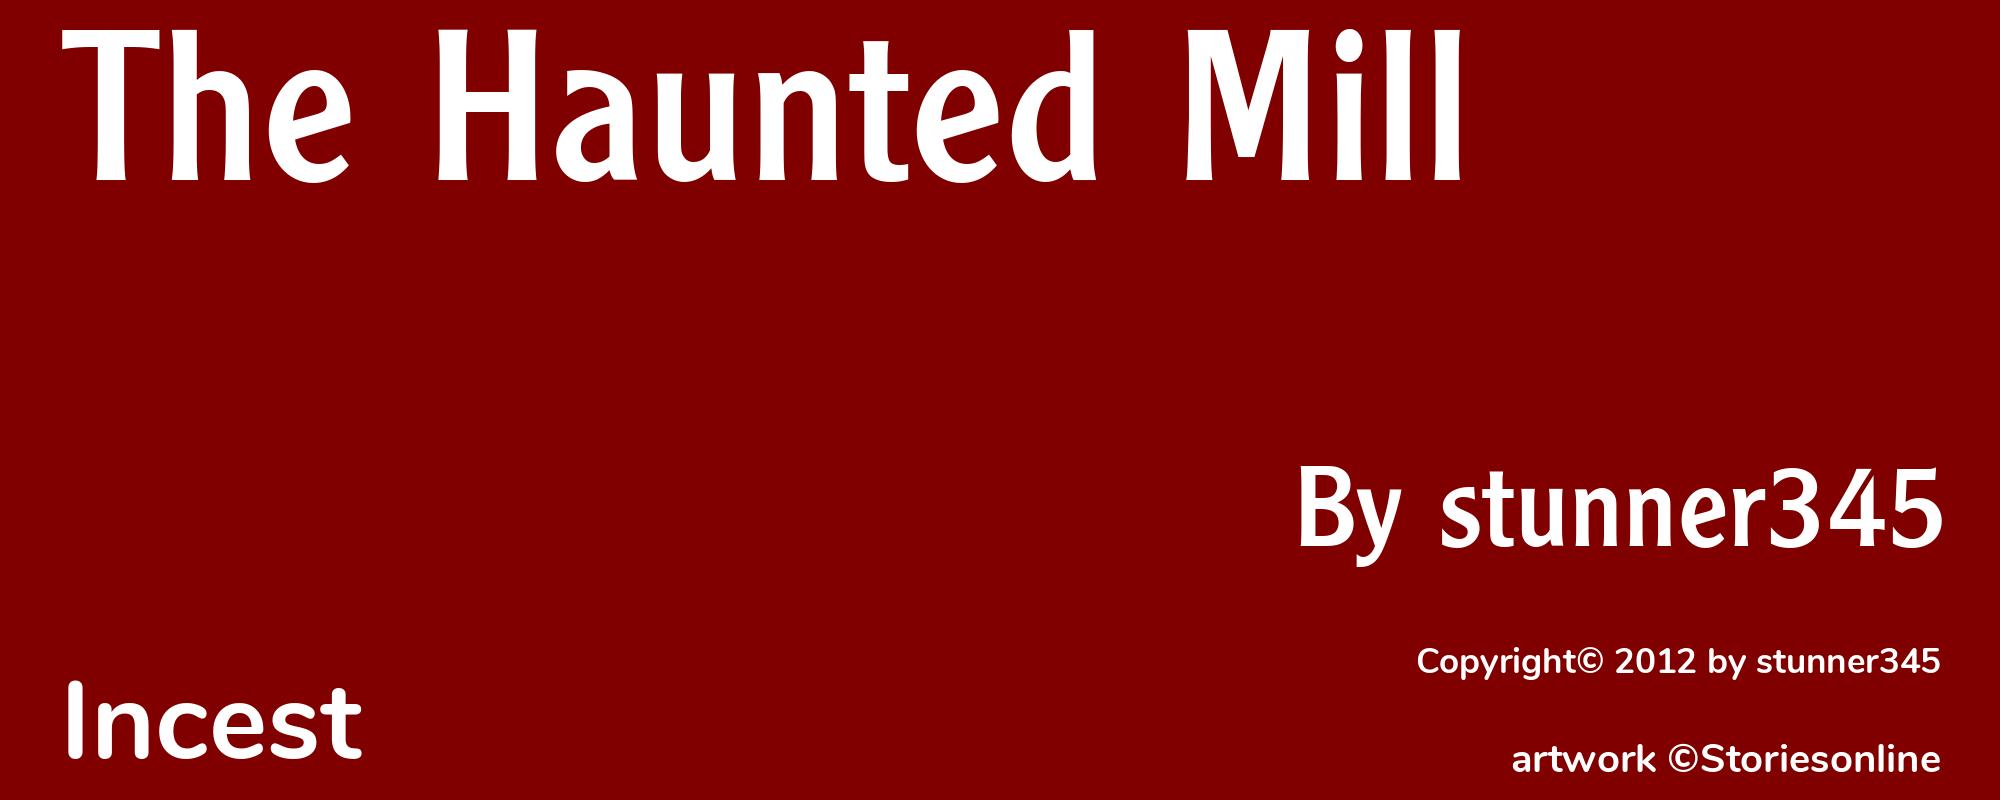 The Haunted Mill - Cover